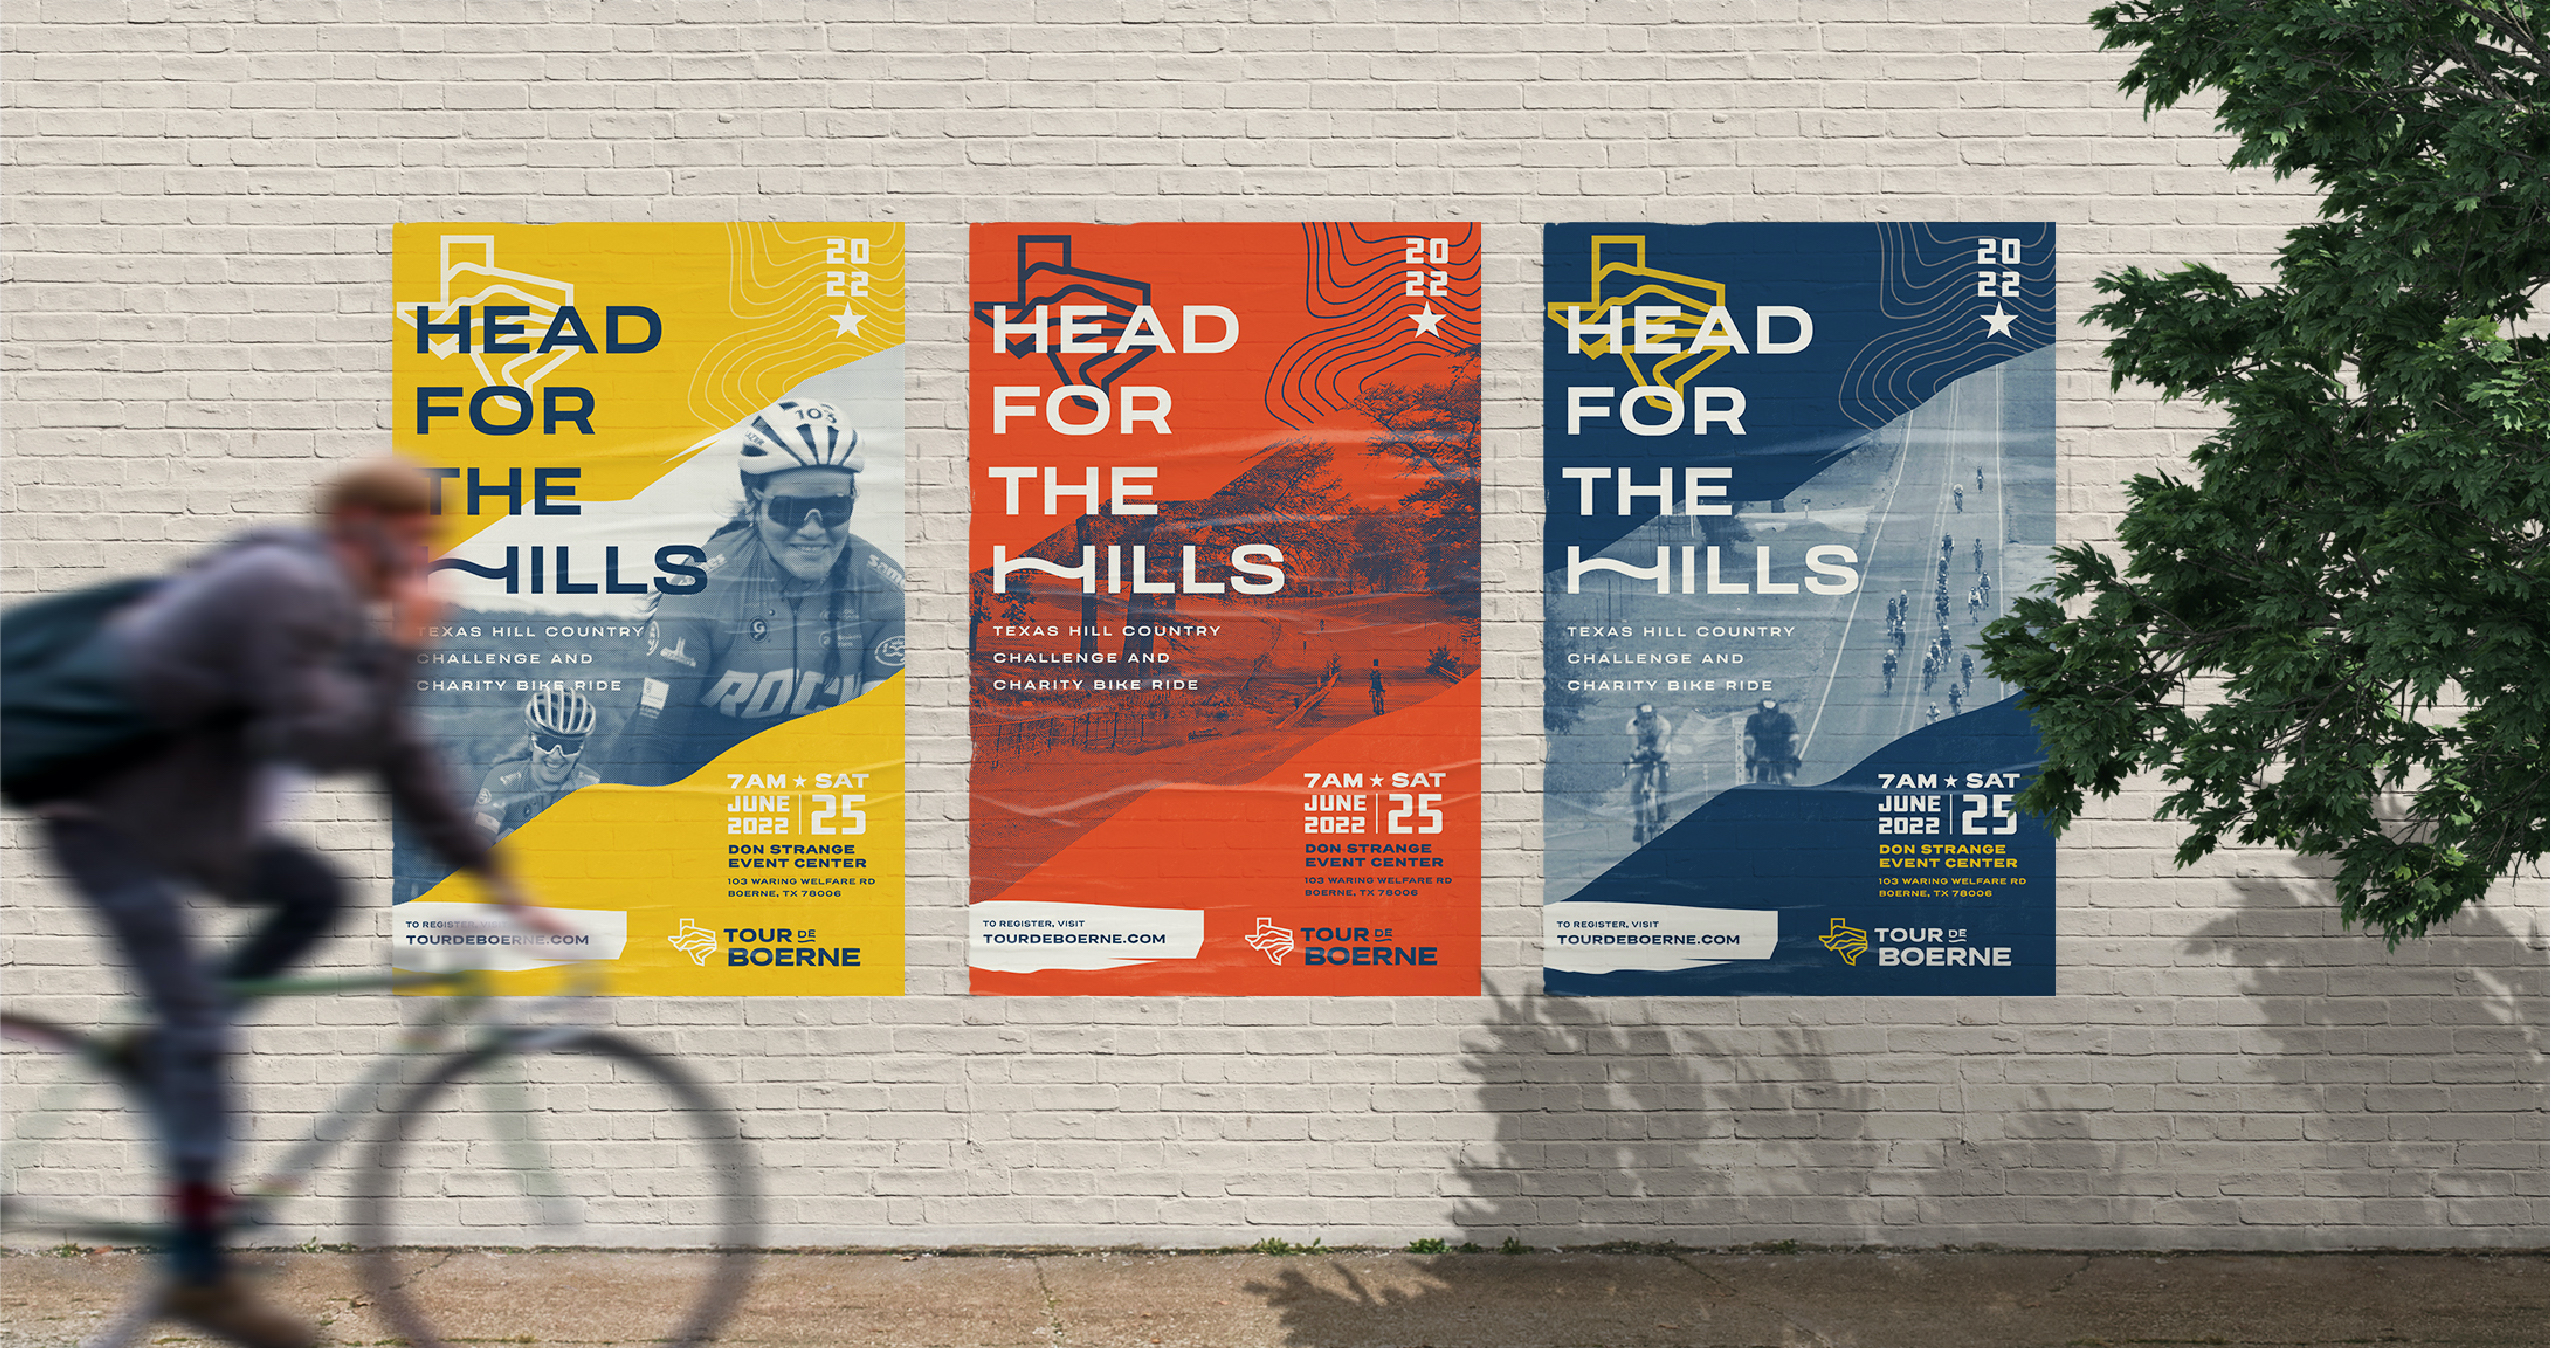 Showing Tour de Boerne event posters. Branding designed by MDR for this San Antonio-based organization.